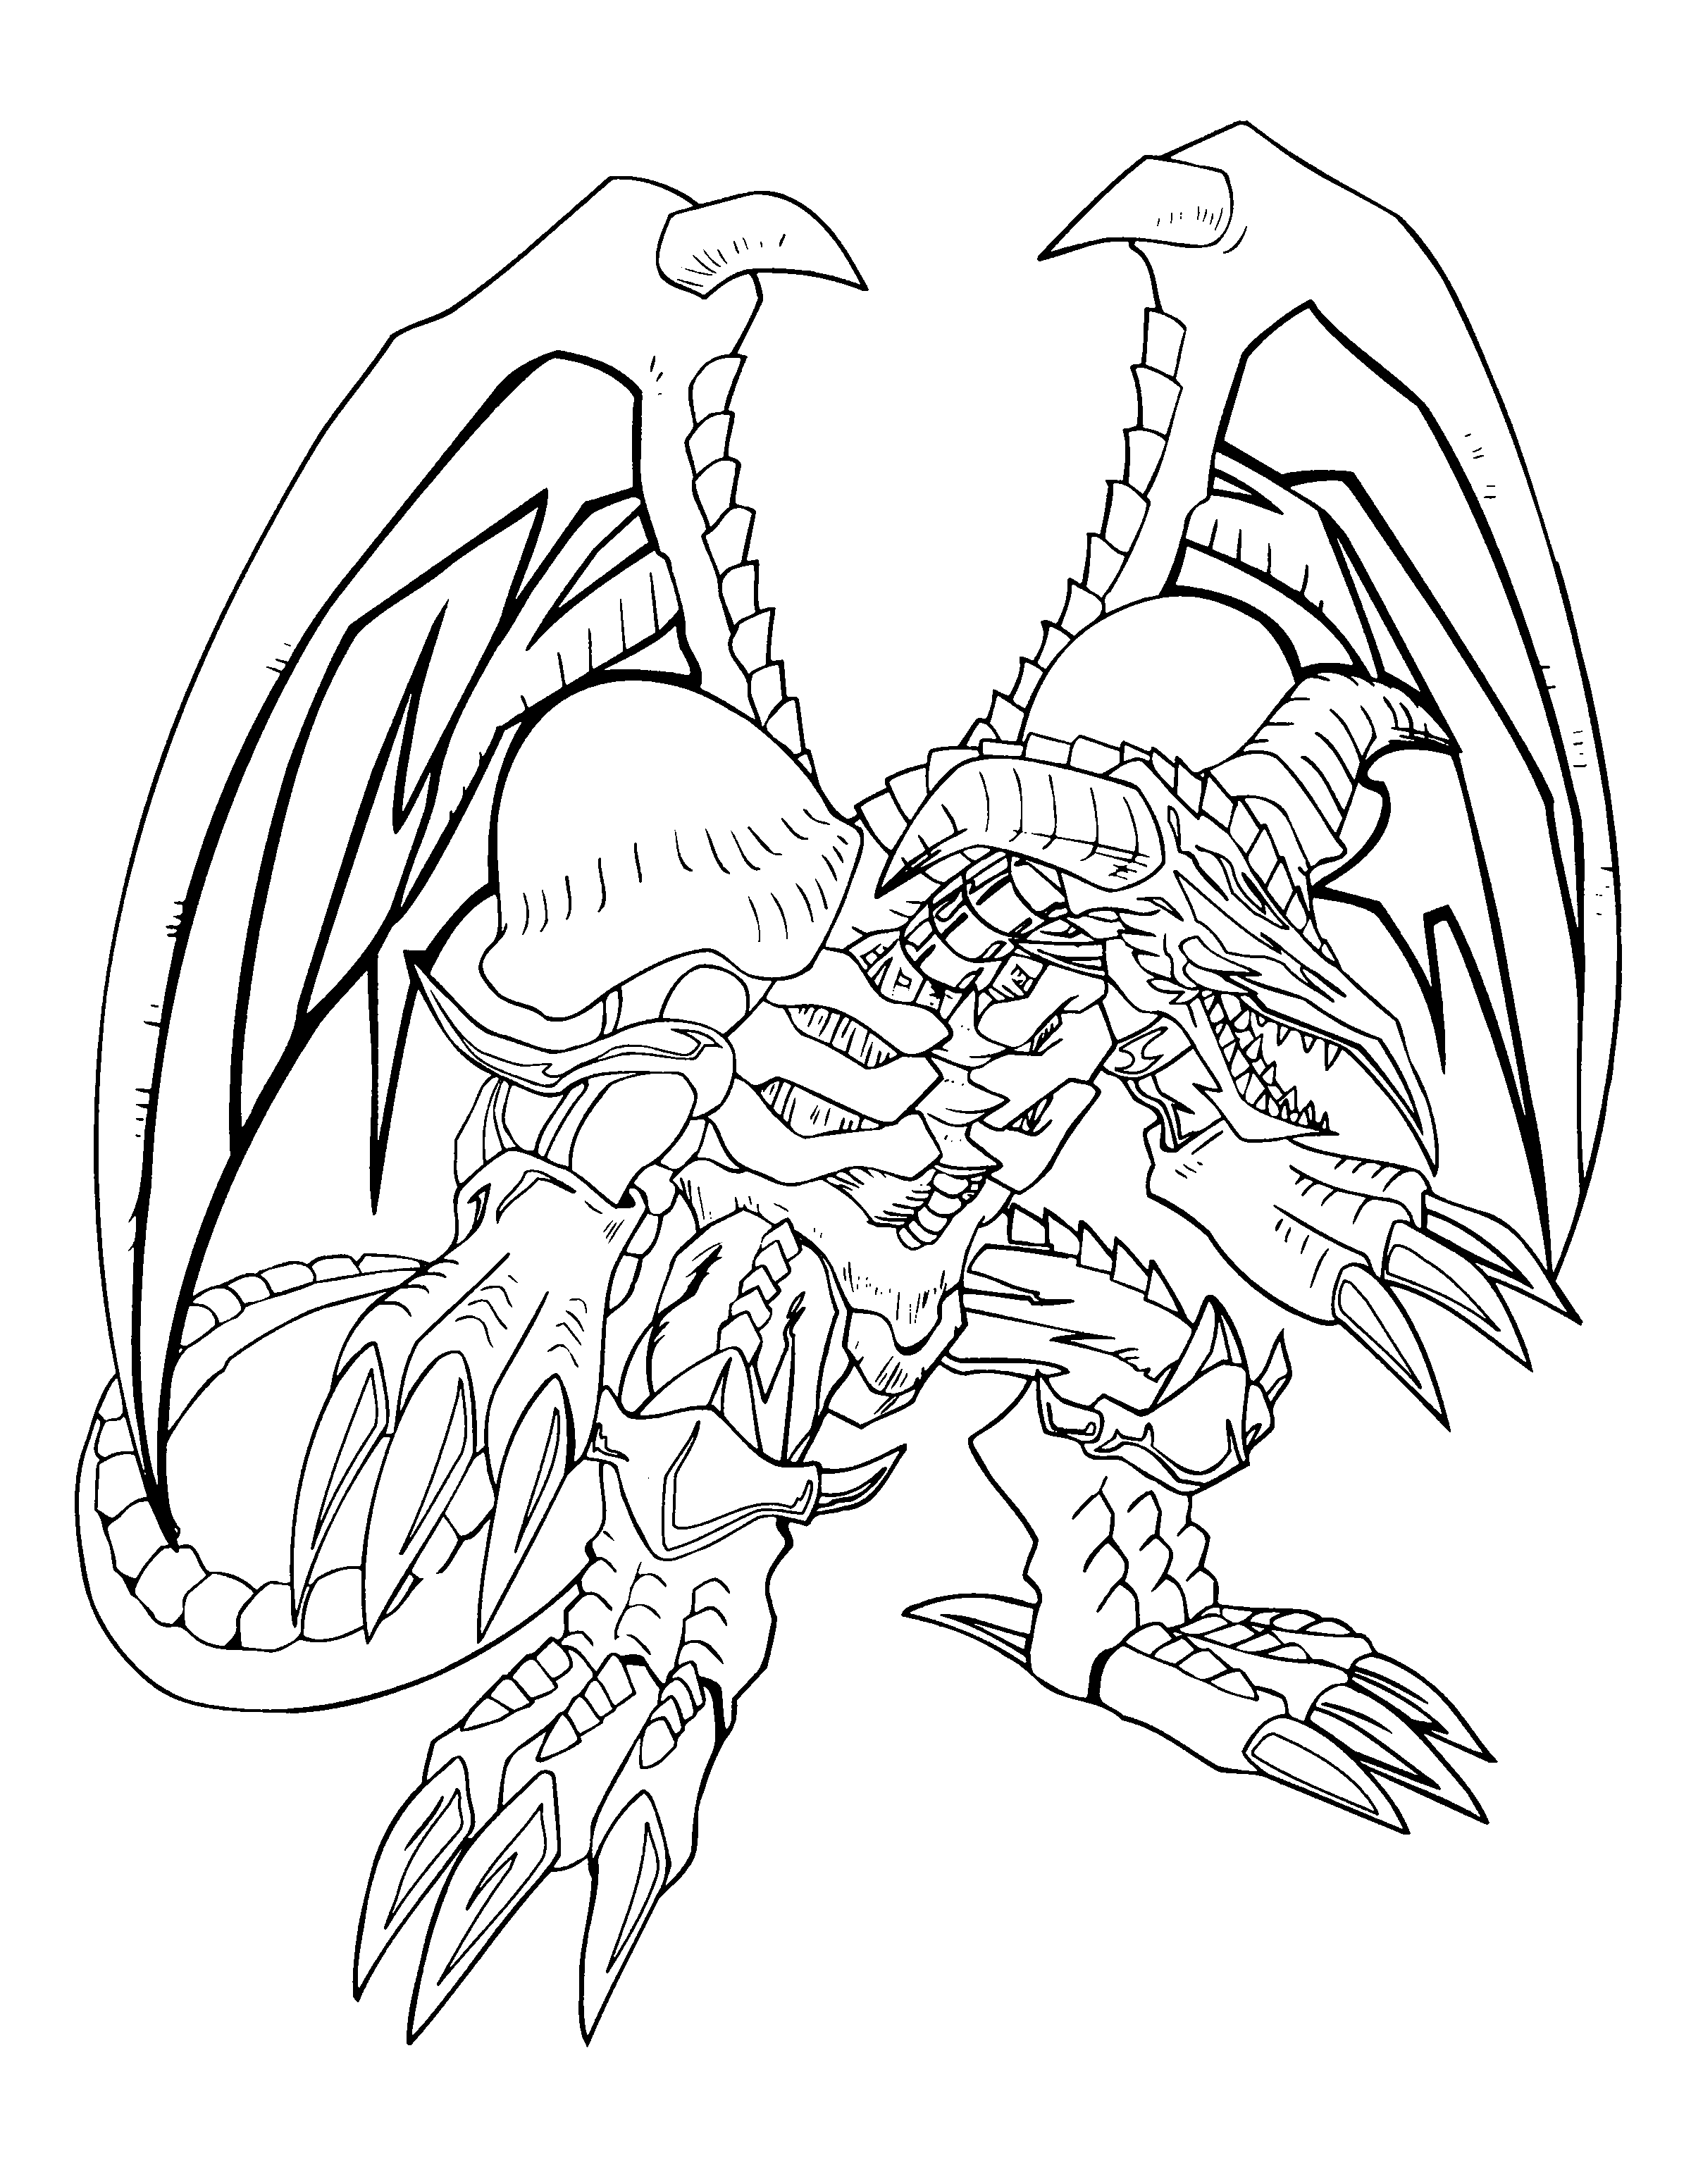 Yu Gi Oh Coloring Page Tv Series Coloring Page | PicGifs.com